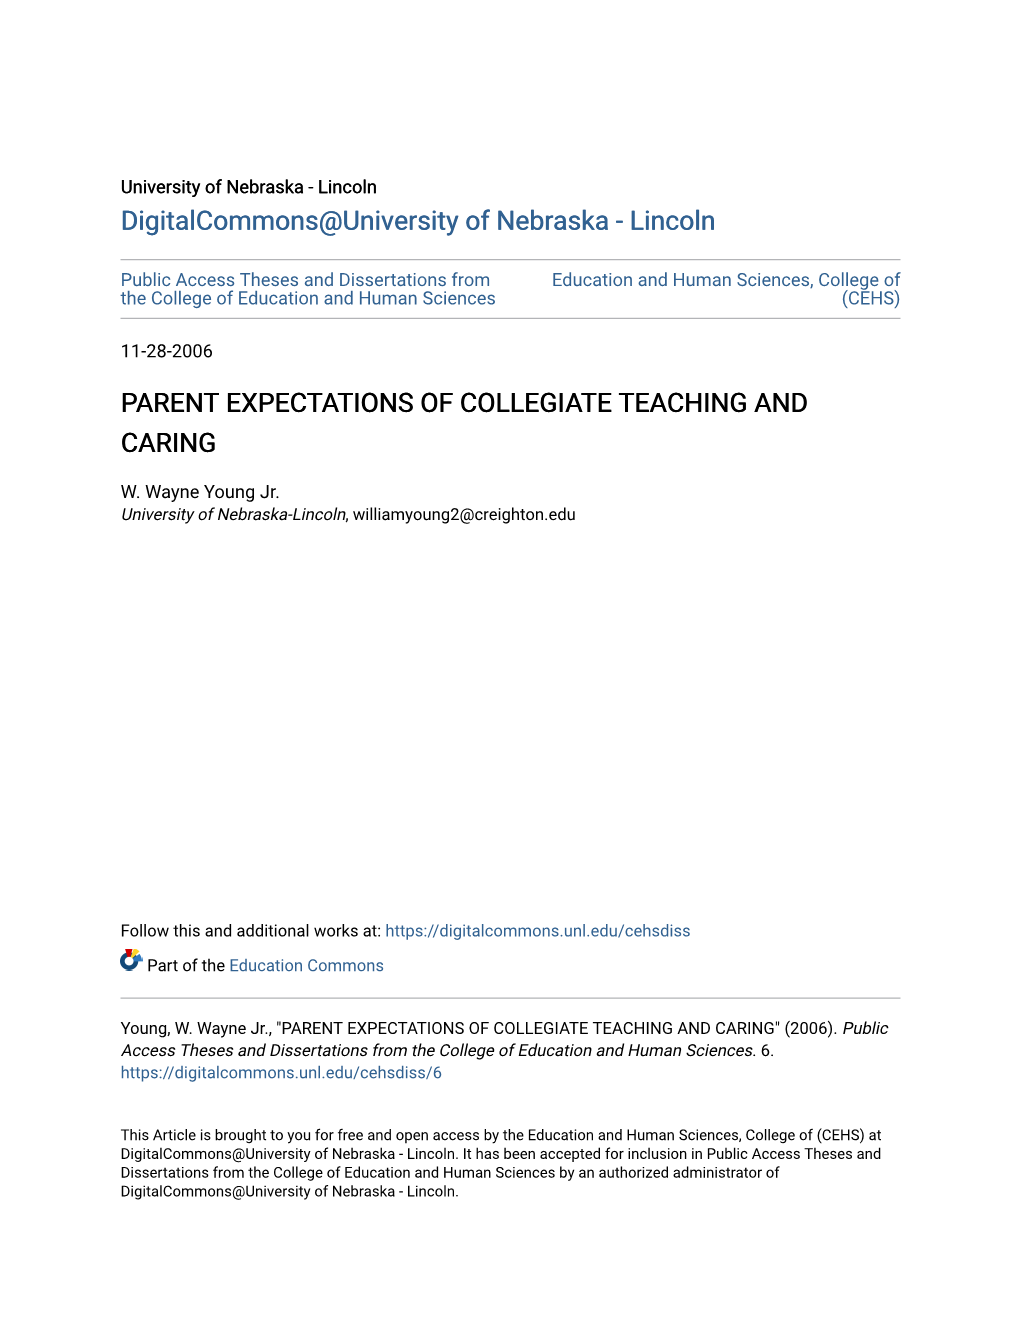 Parent Expectations of Collegiate Teaching and Caring